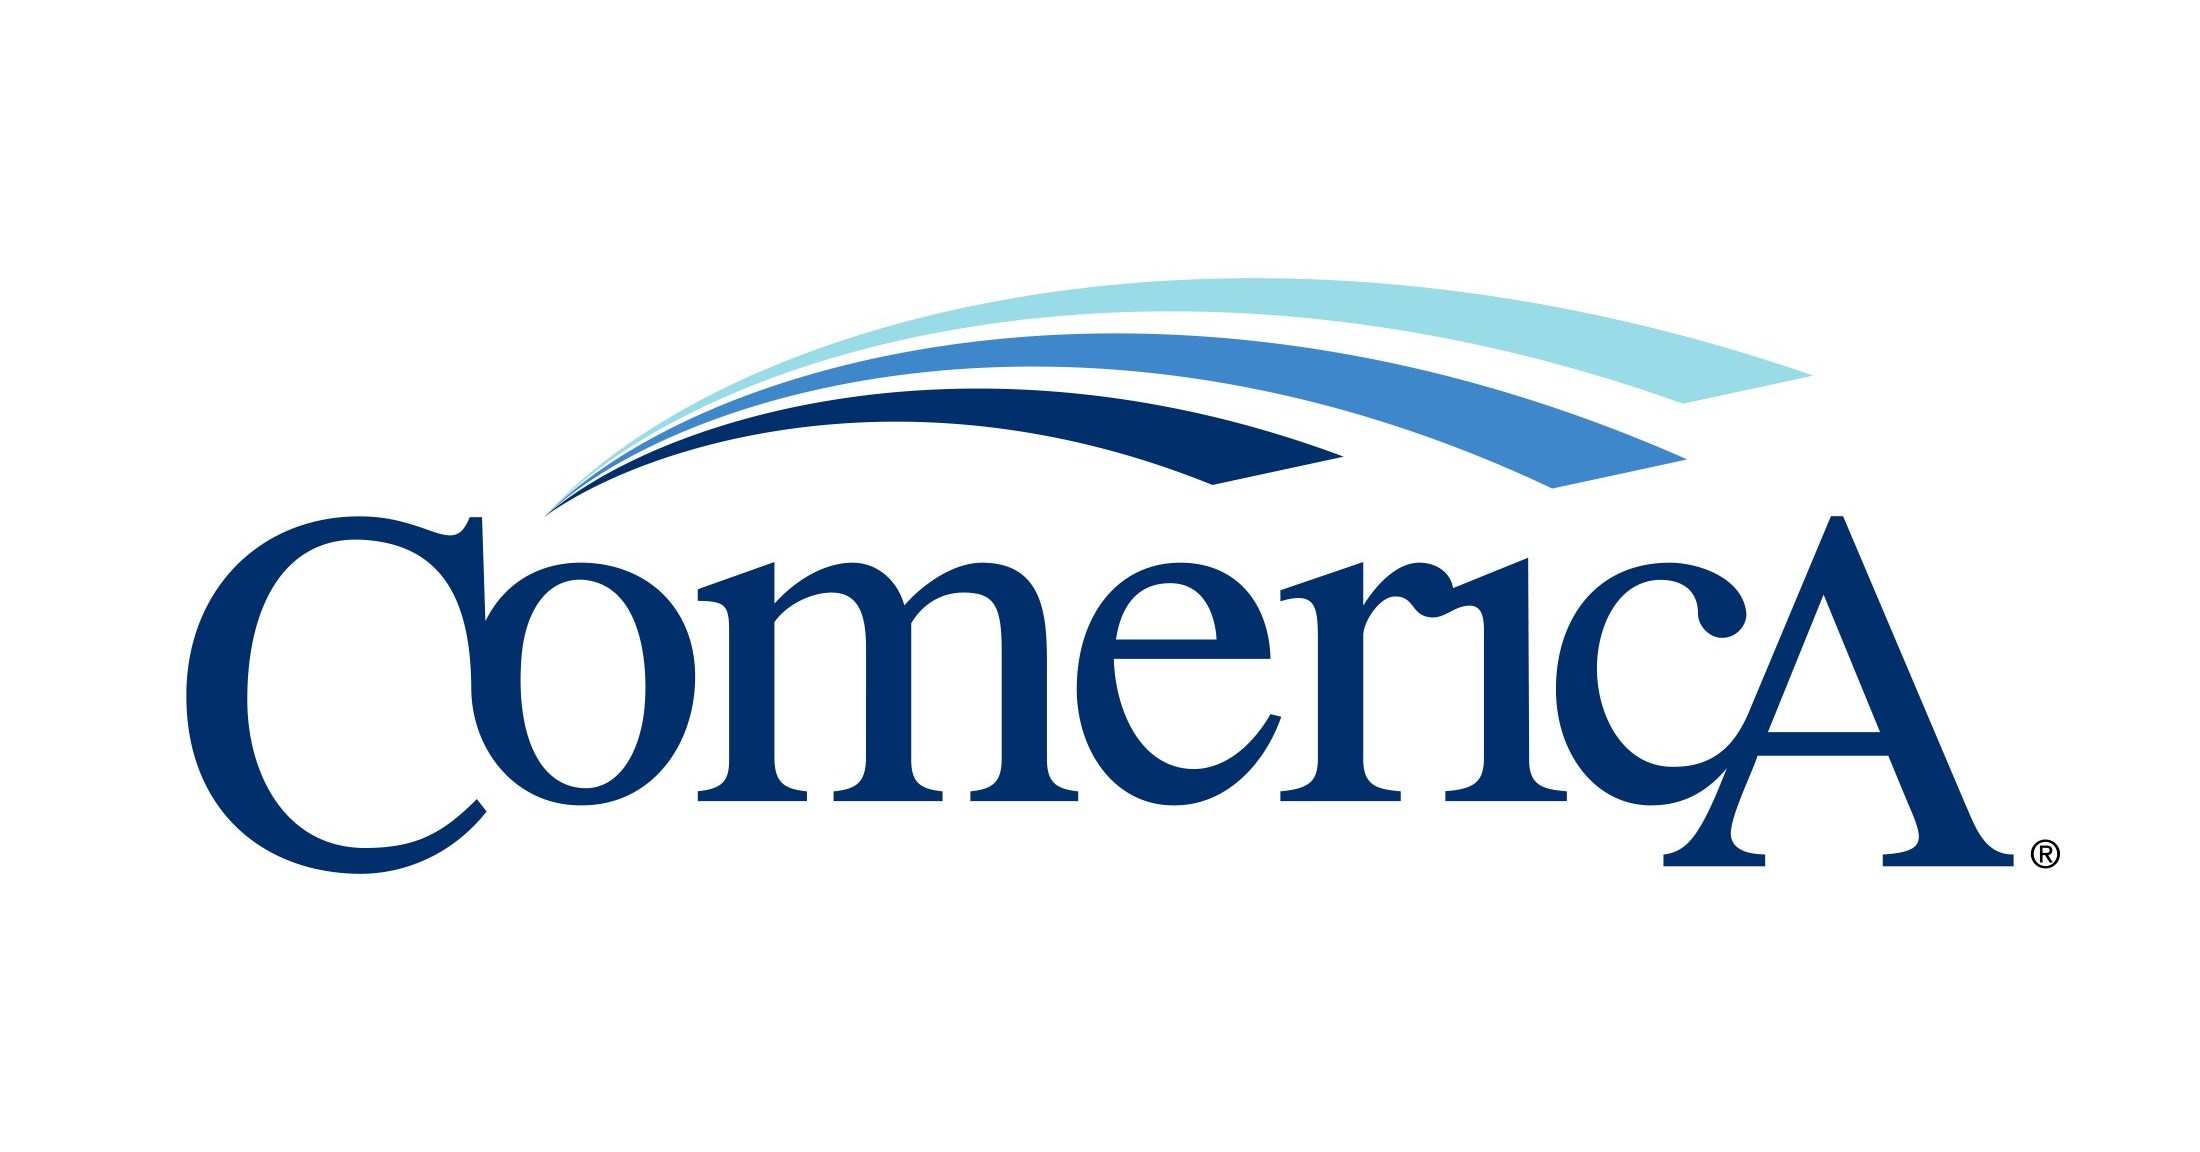 Comerica Bank Unveils New Logo Signifying the Company's Continued Evolution in a New Era of Banking